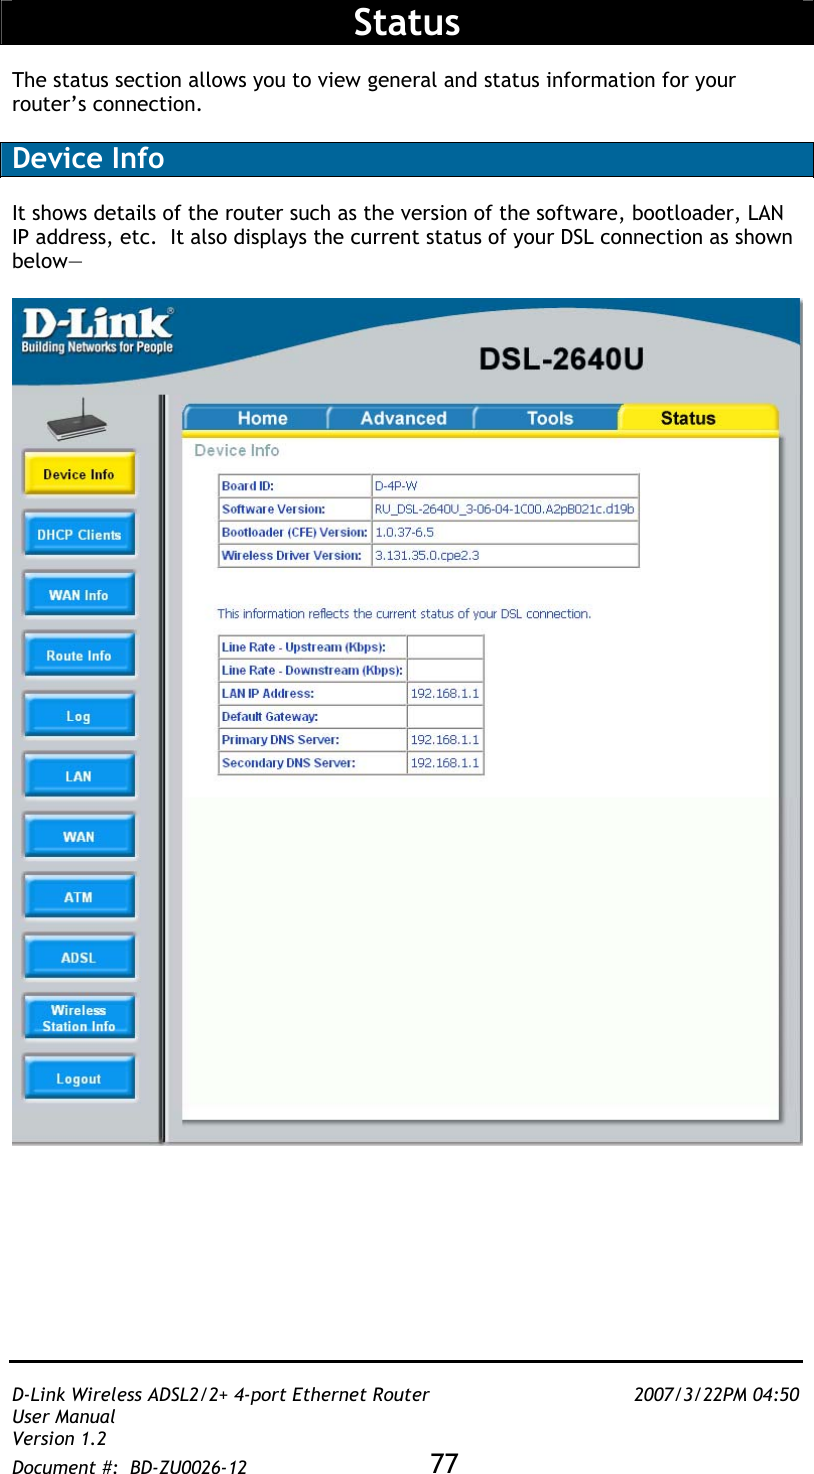   D-Link Wireless ADSL2/2+ 4-port Ethernet Router    2007/3/22PM 04:50 User Manual   Version 1.2 Document #:  BD-ZU0026-12 77    Status  The status section allows you to view general and status information for your router’s connection.  Device Info  It shows details of the router such as the version of the software, bootloader, LAN IP address, etc.  It also displays the current status of your DSL connection as shown below—   